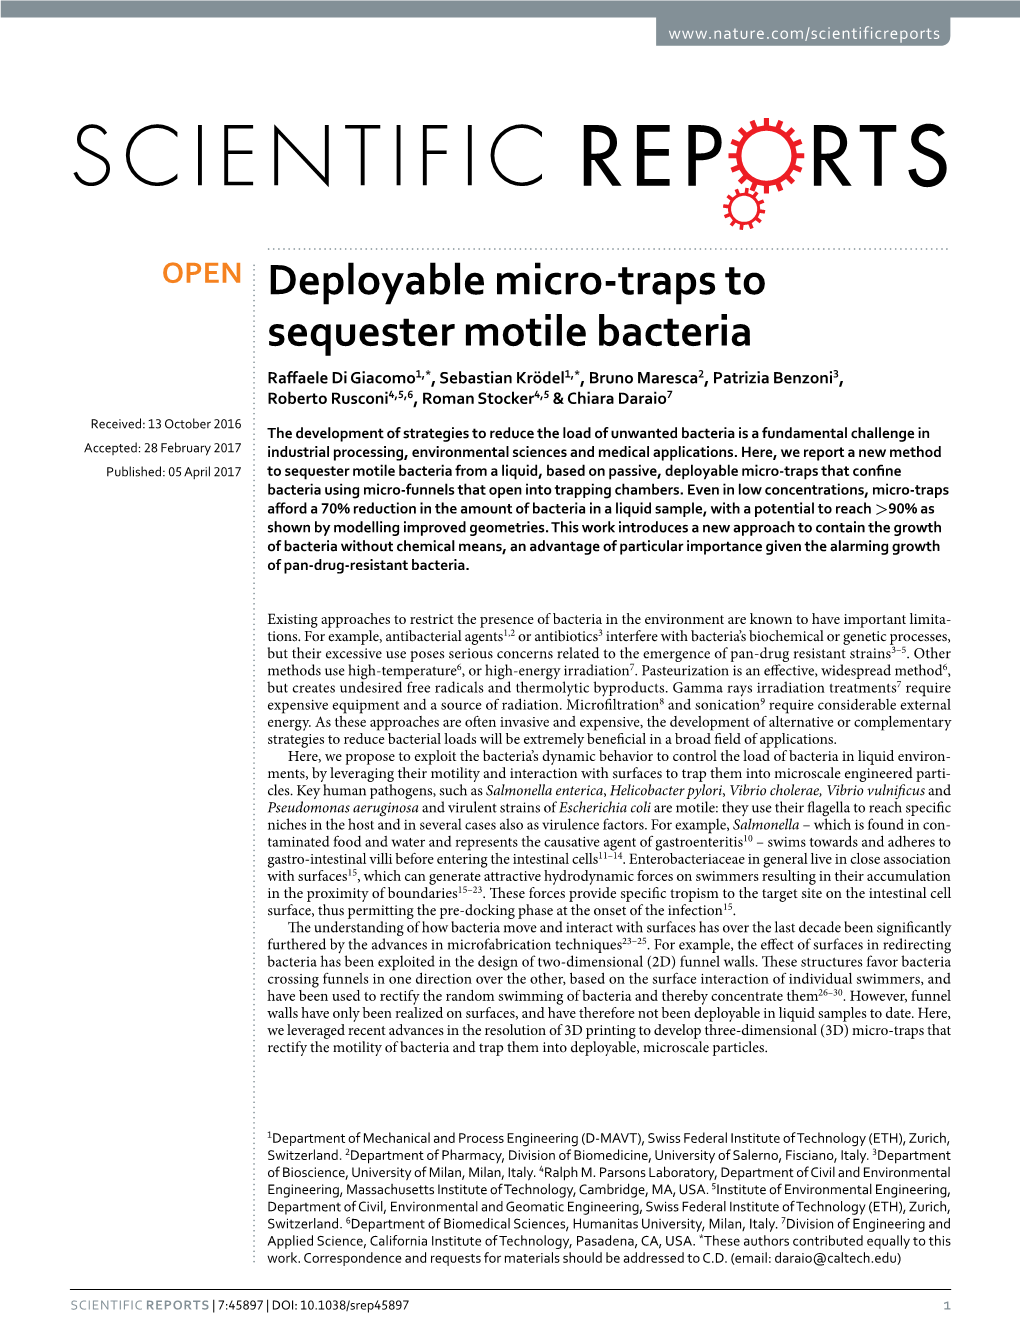 Deployable Micro-Traps to Sequester Motile Bacteria